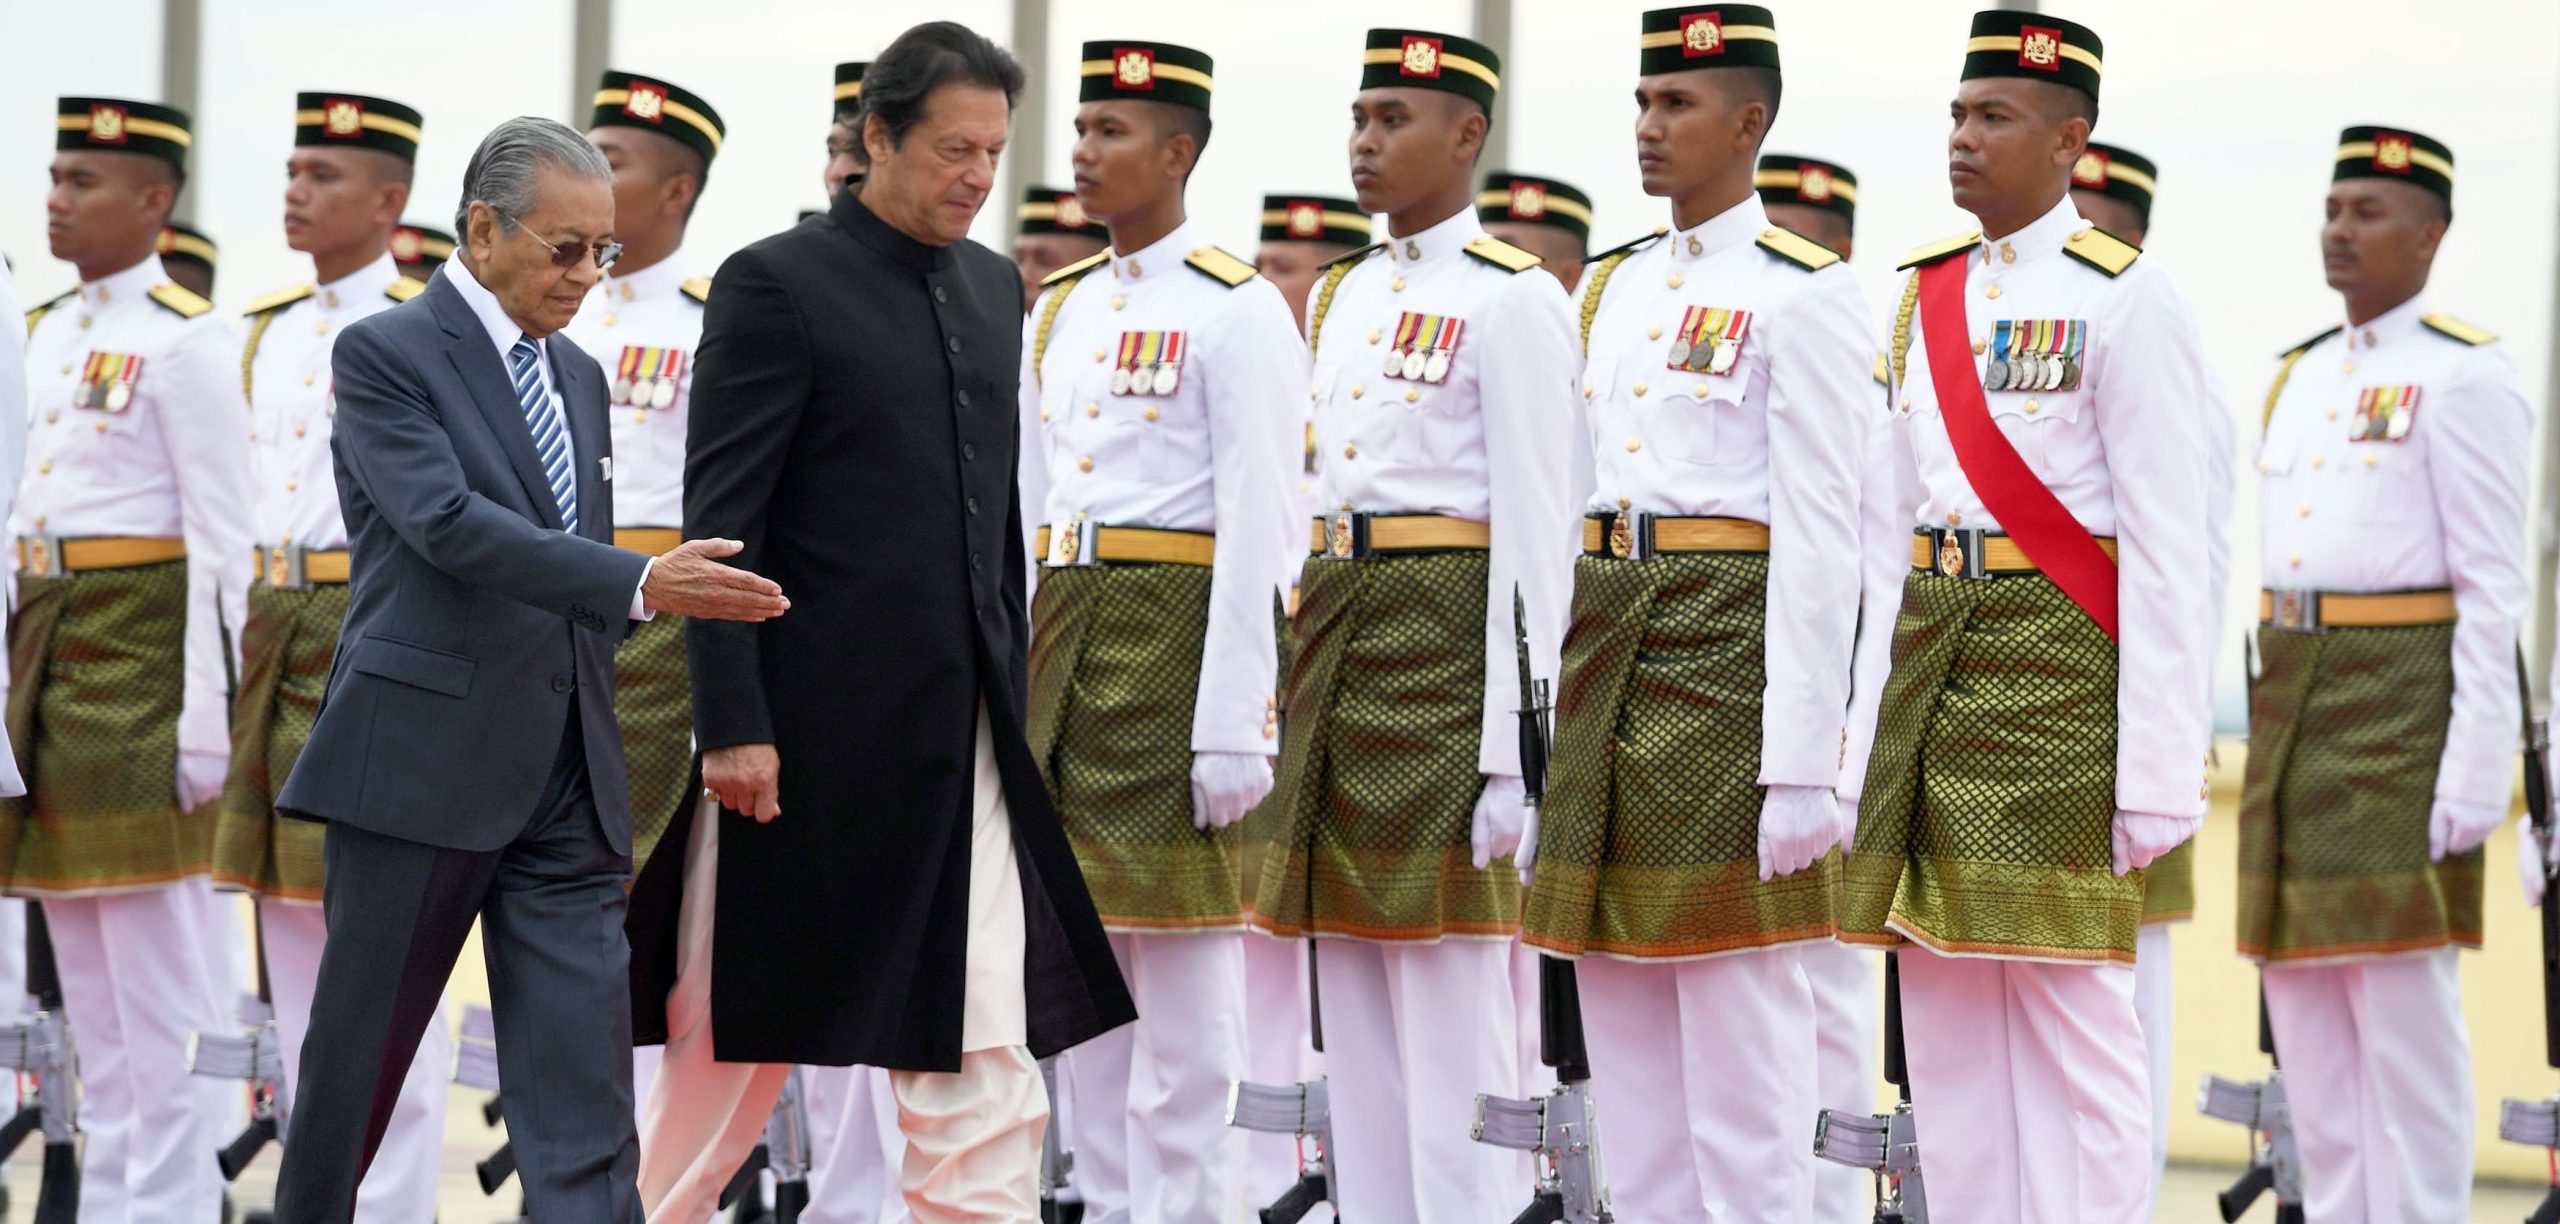 Prime Minister Imran Khan Visit To “Malaysia” scaled